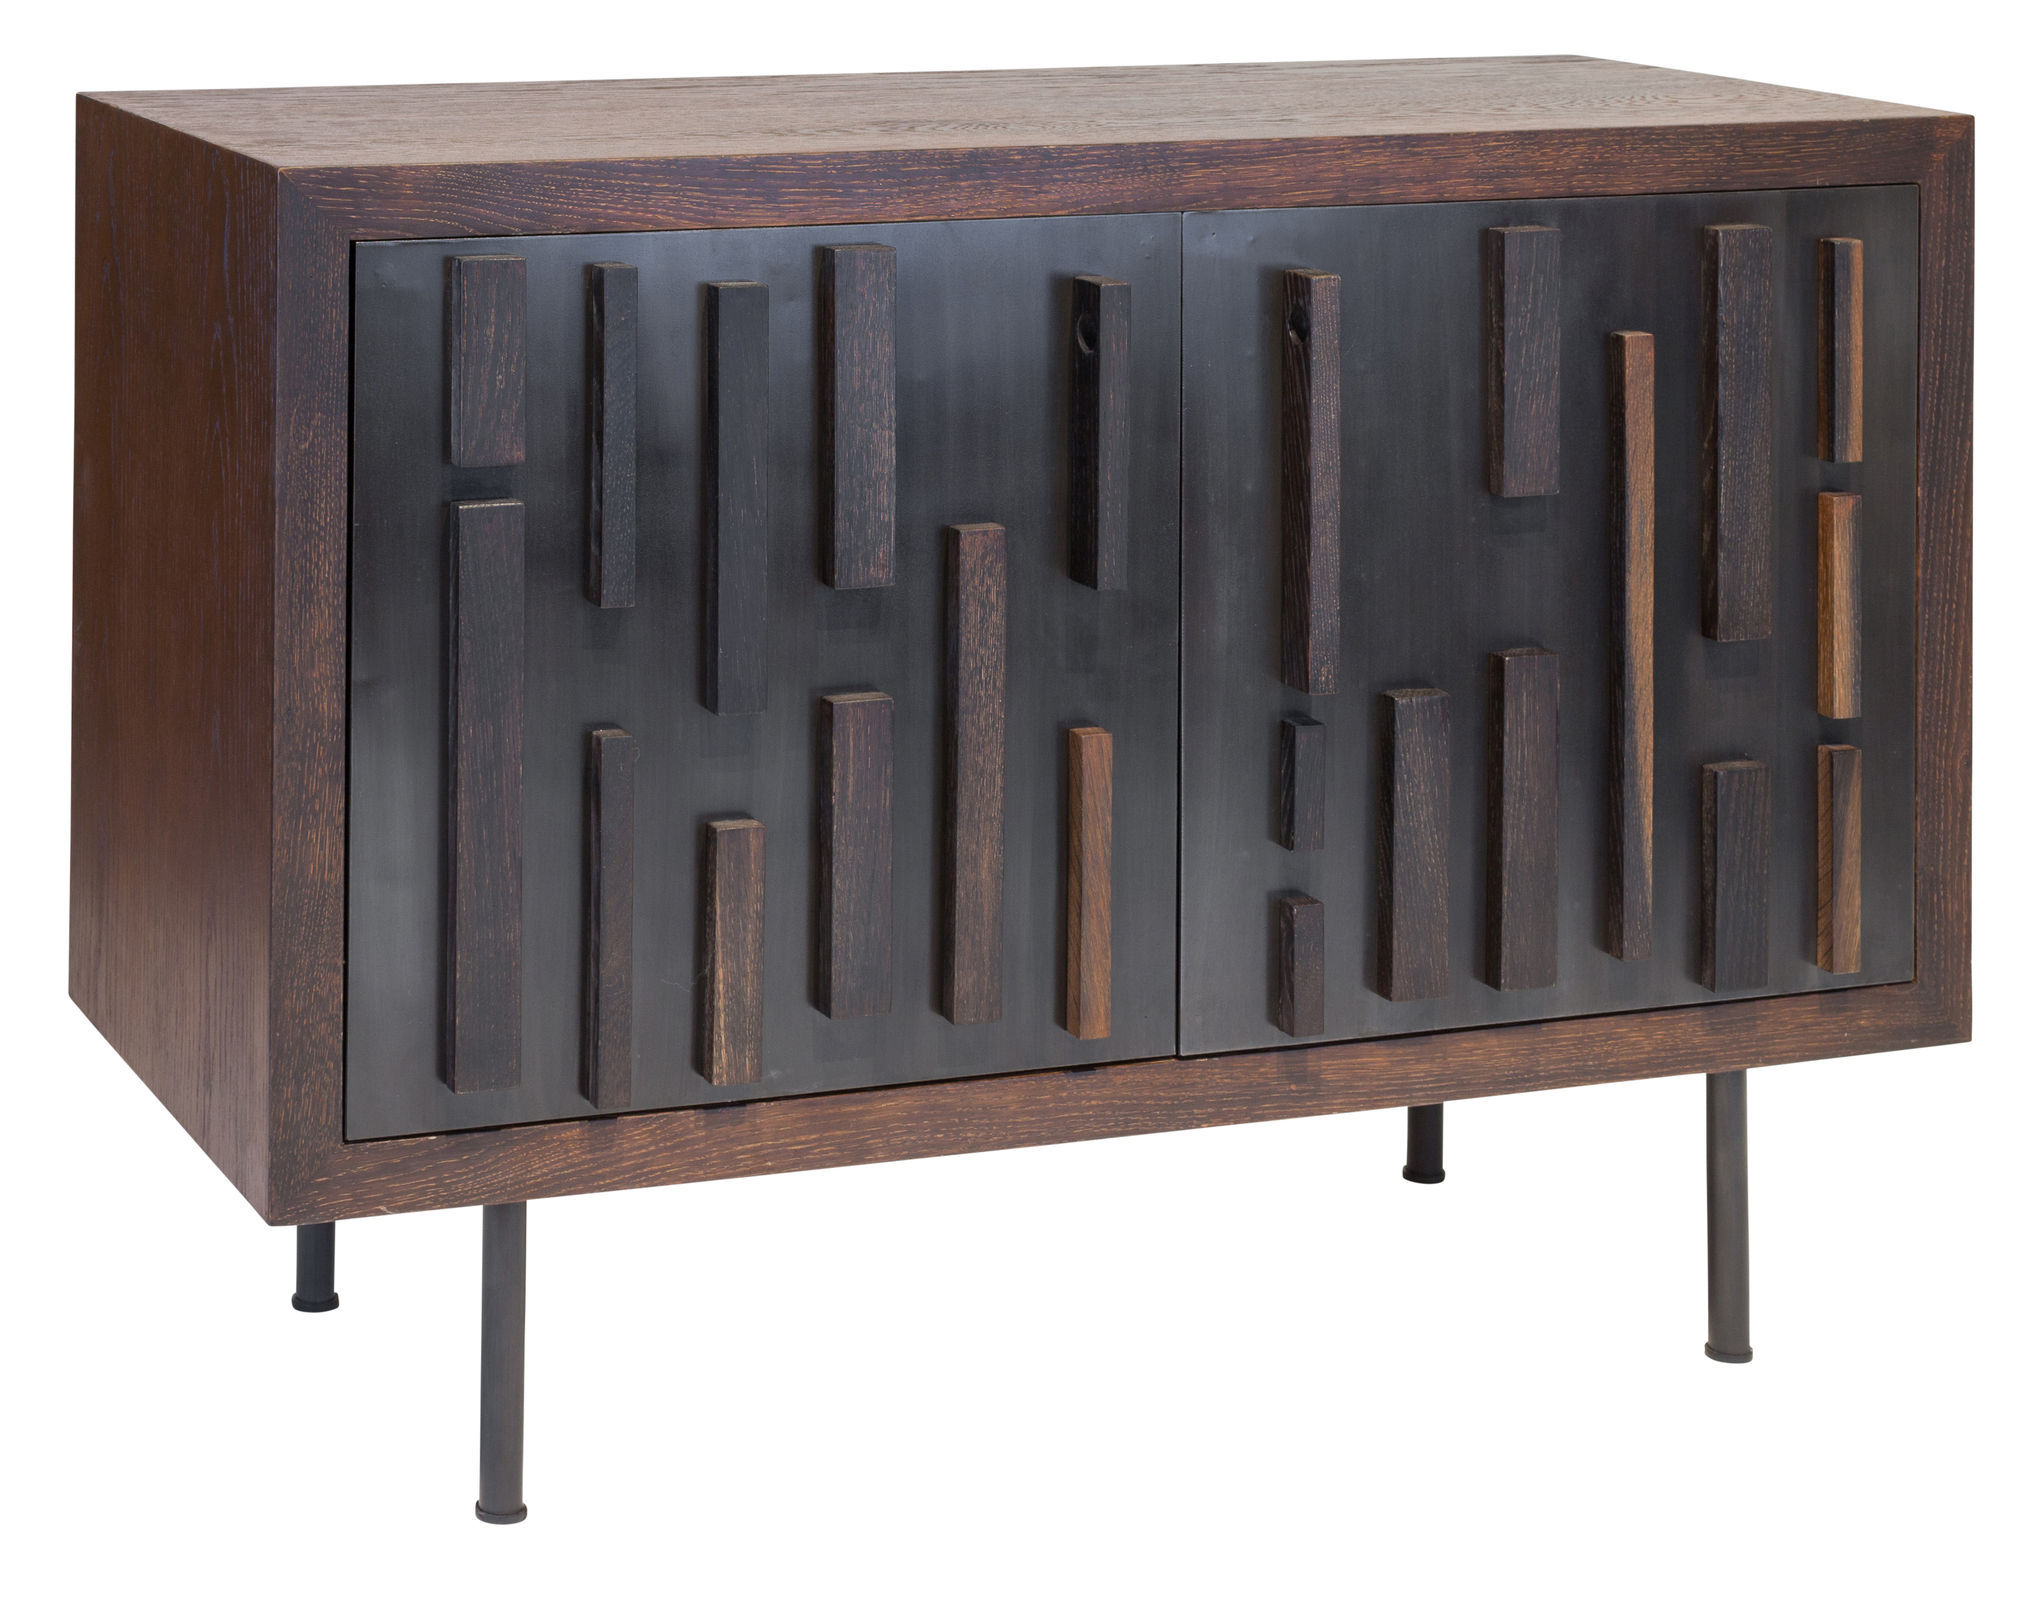 Black Oak Wood And Wrought Iron Sideboards